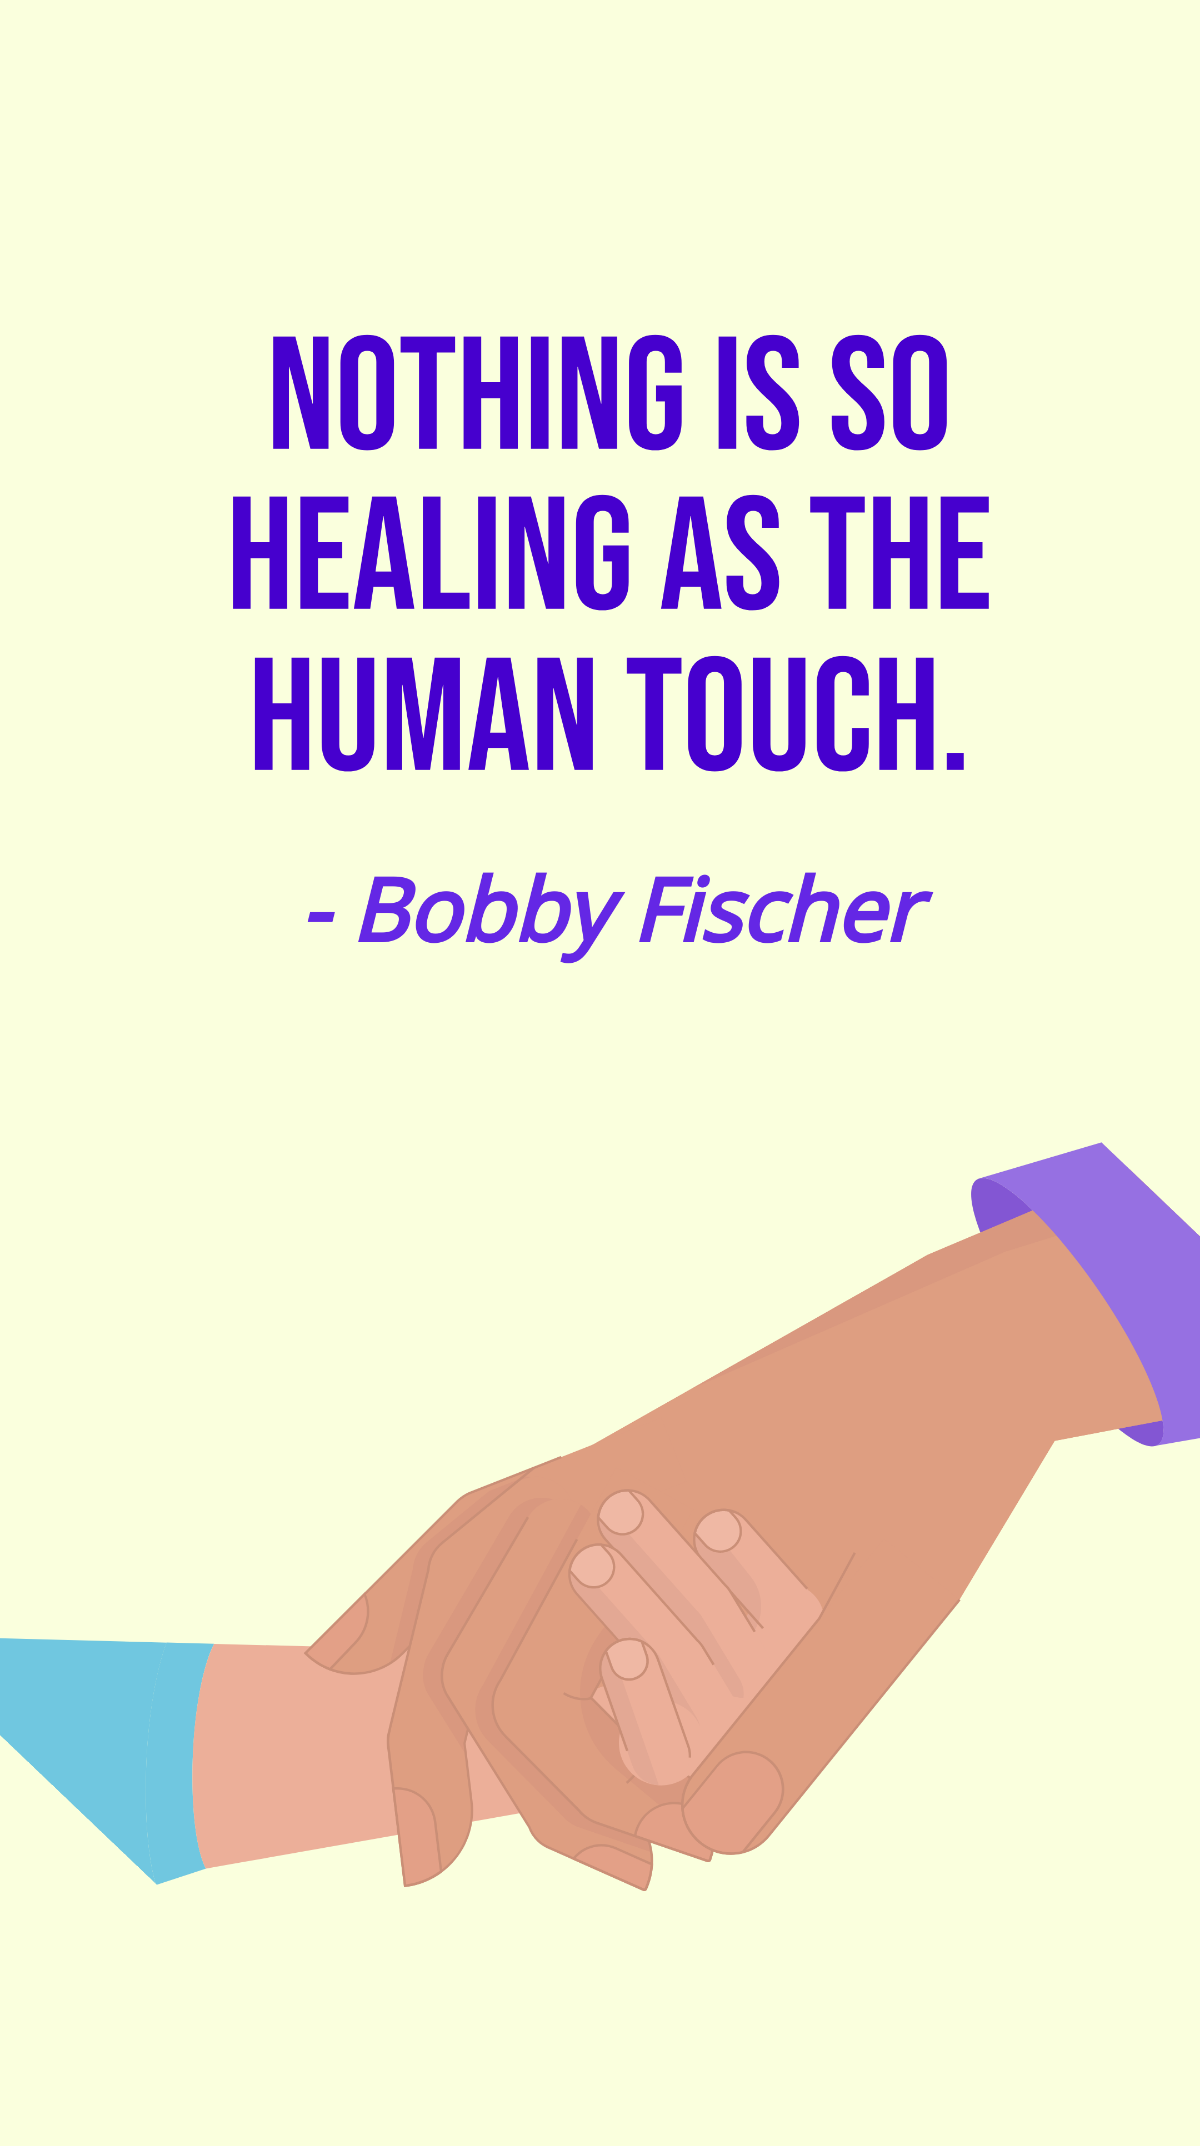 Bobby Fischer - Nothing is so healing as the human touch.